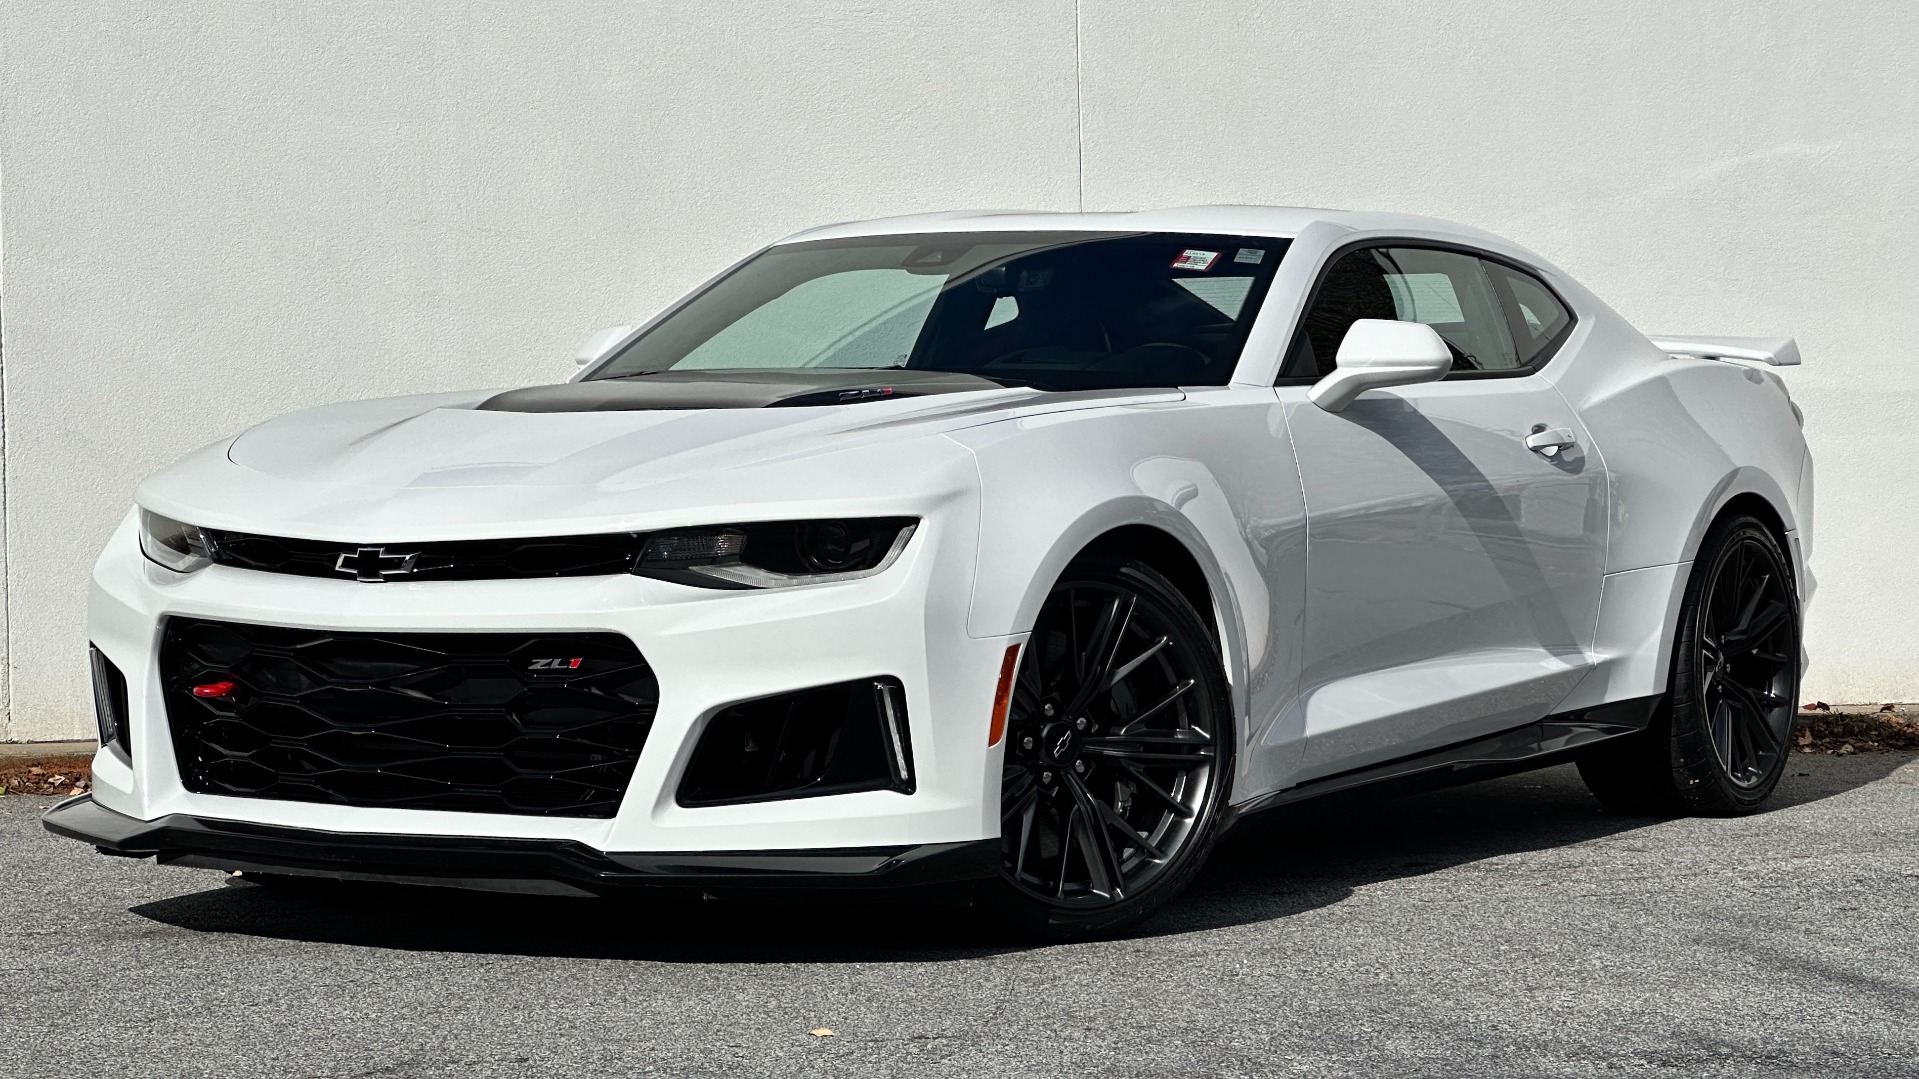 Used 2020 Chevrolet Camaro ZL1 / SUPERCHARGED / CARBON FIBER / RED SEAT BELTS / RECARO SEATING / 10SPD for sale $66,995 at Formula Imports in Charlotte NC 28227 1